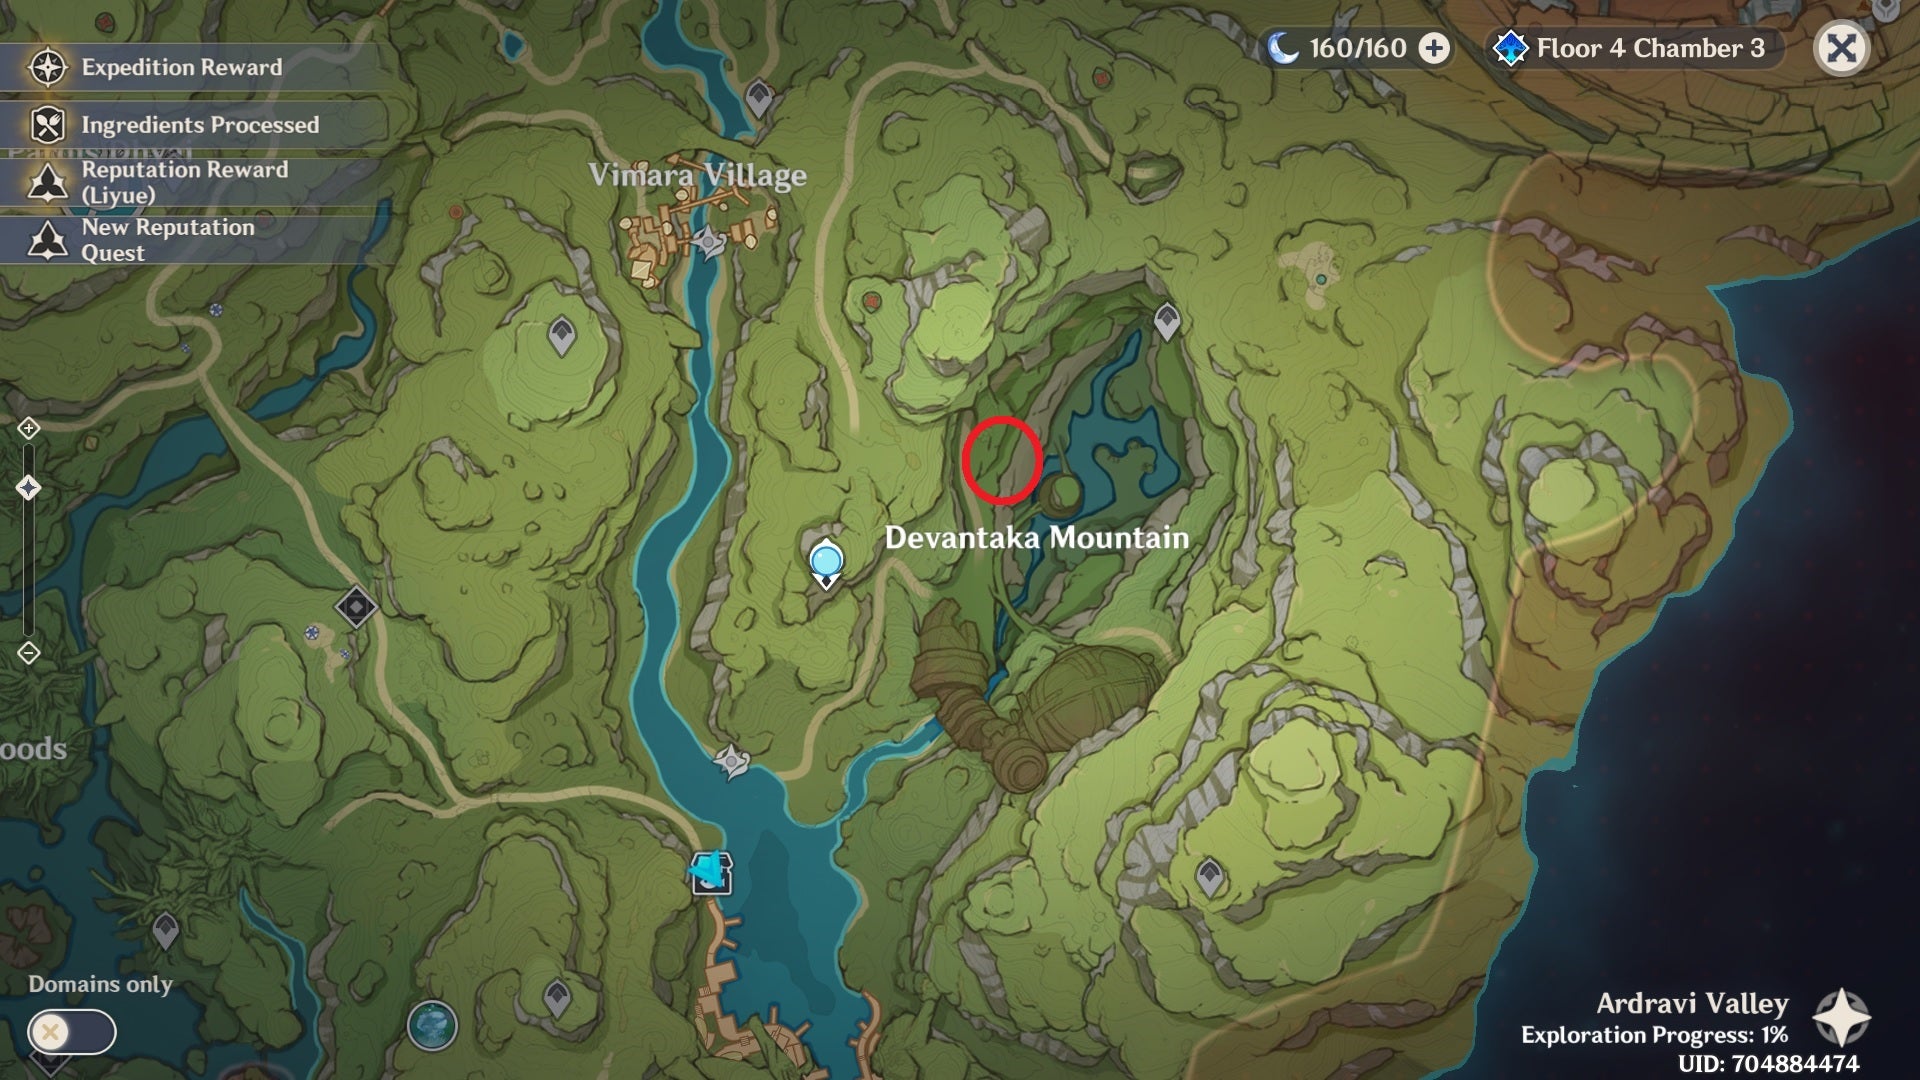 Vimana Agama quest location in circled on map (genshin impact)